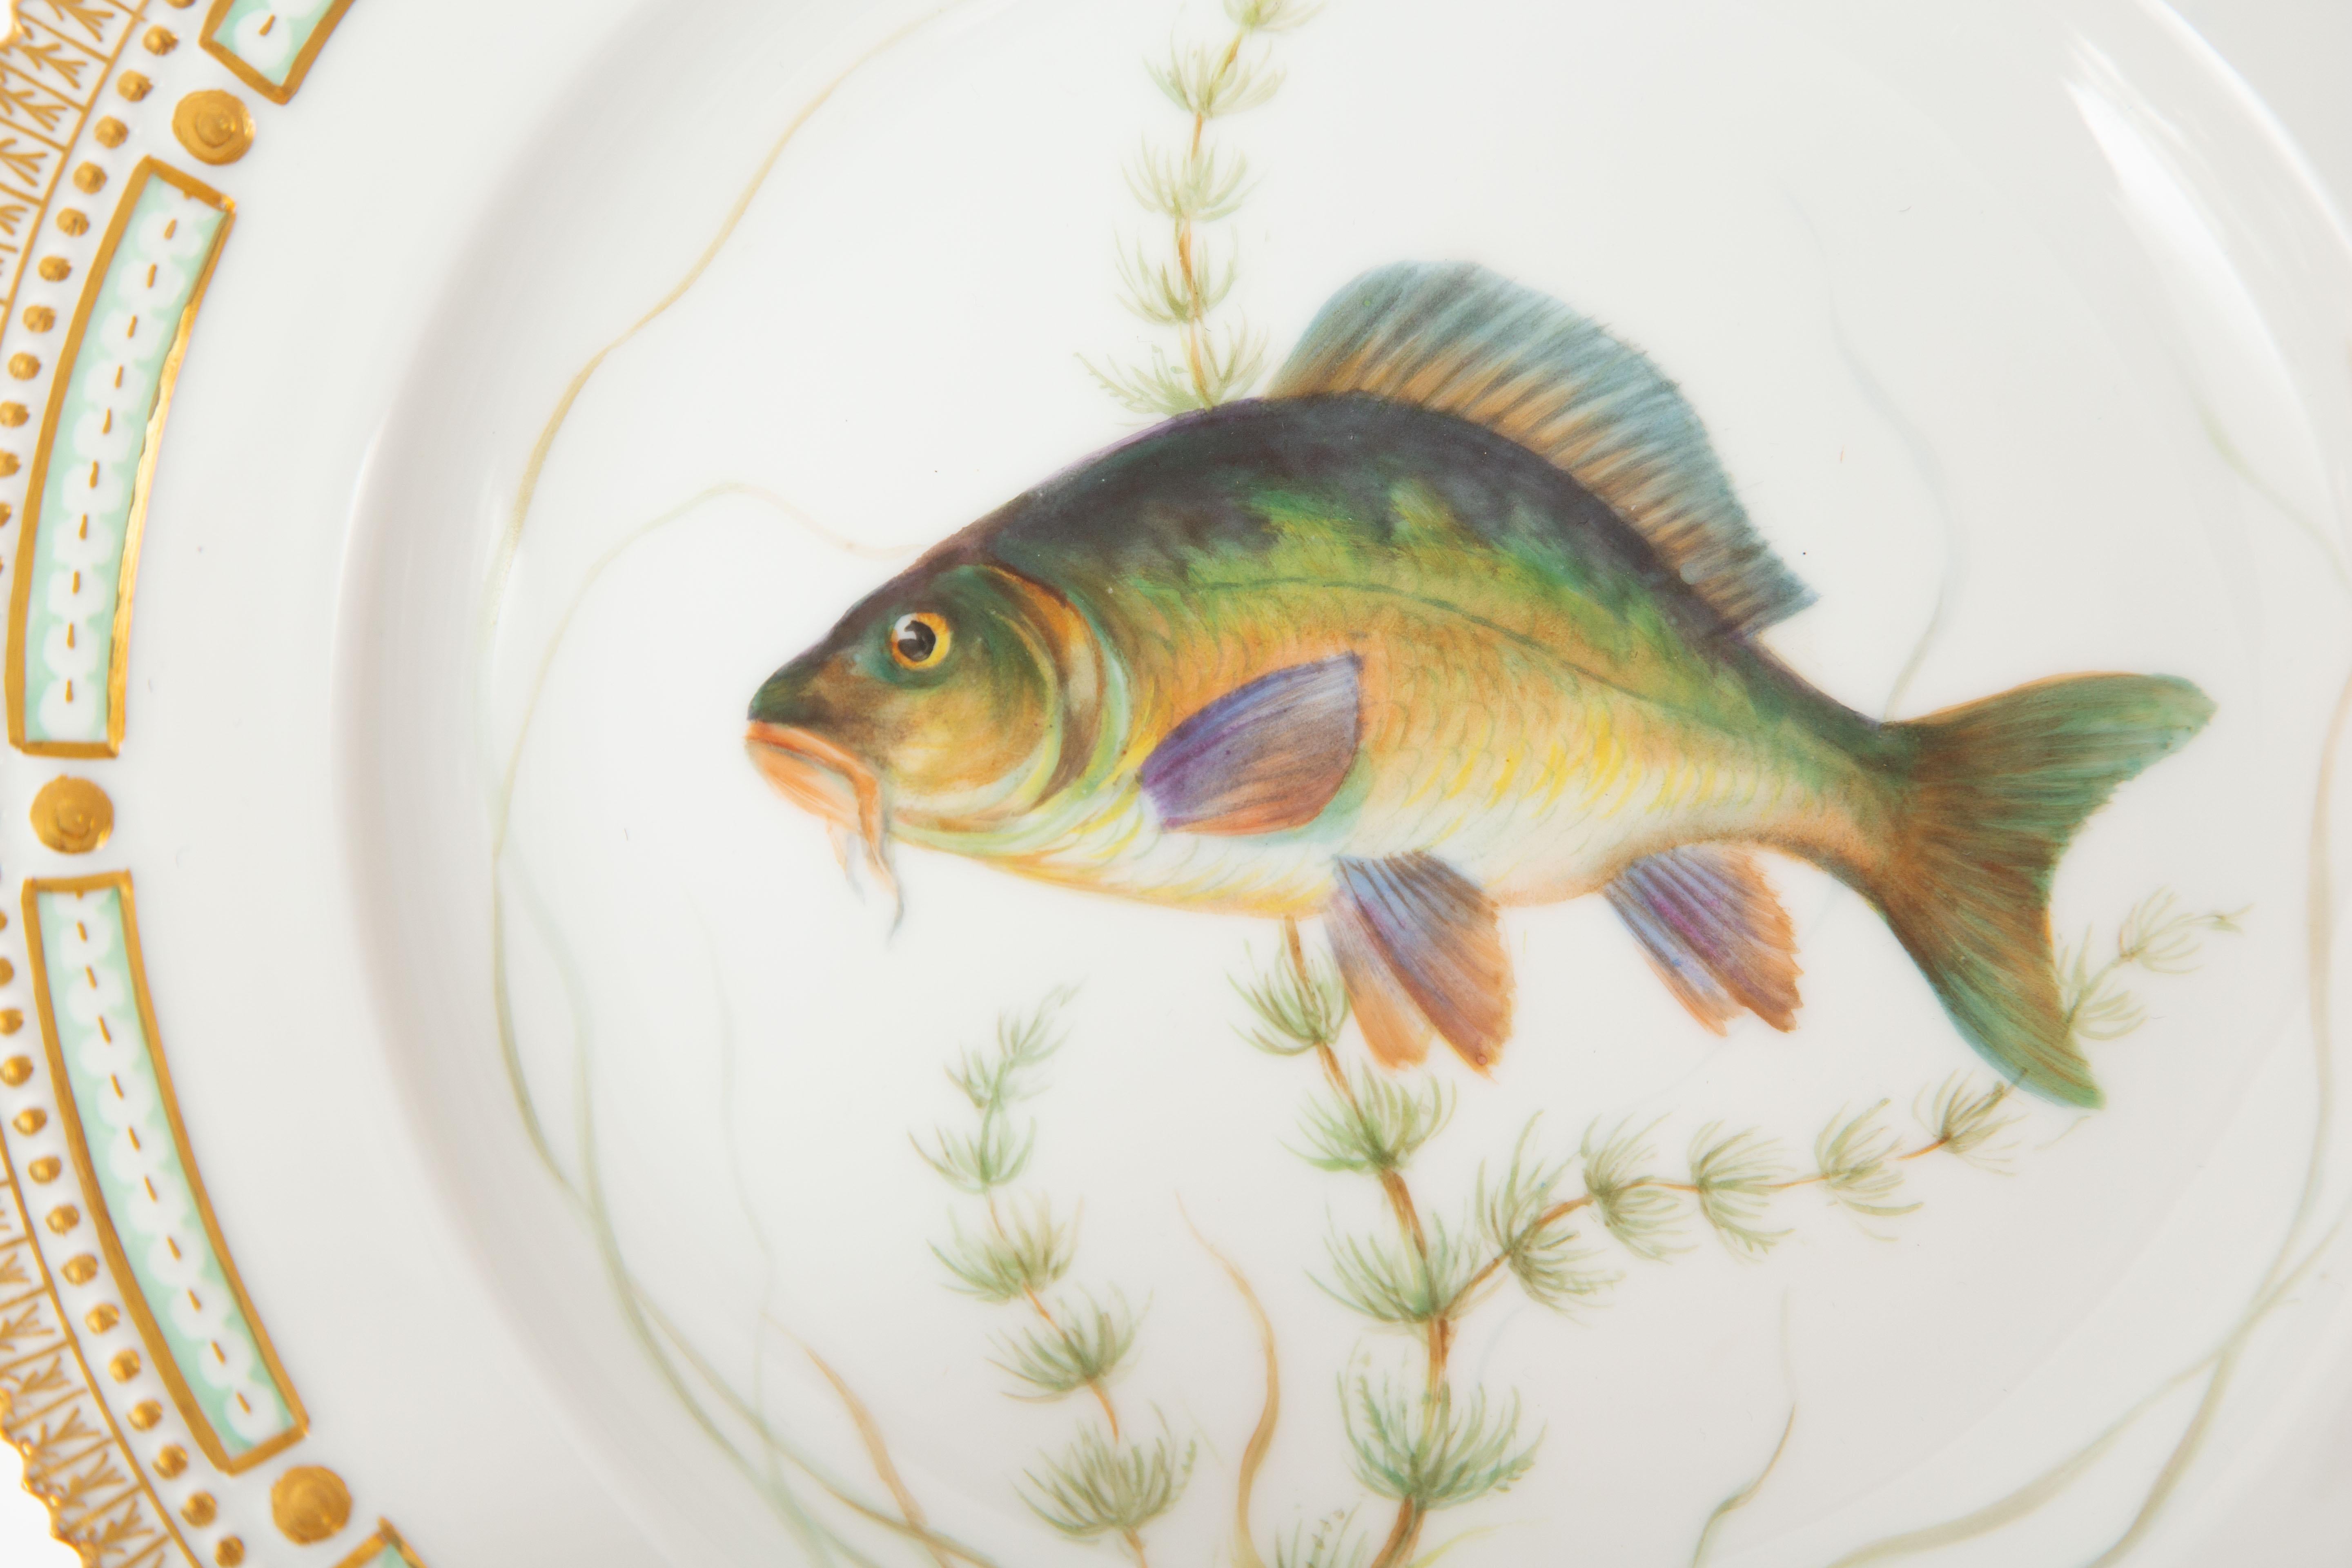 12 Flora Danica Fish Plates, Vintage and Vibrantly Painted, Royal Copenhagen For Sale 5